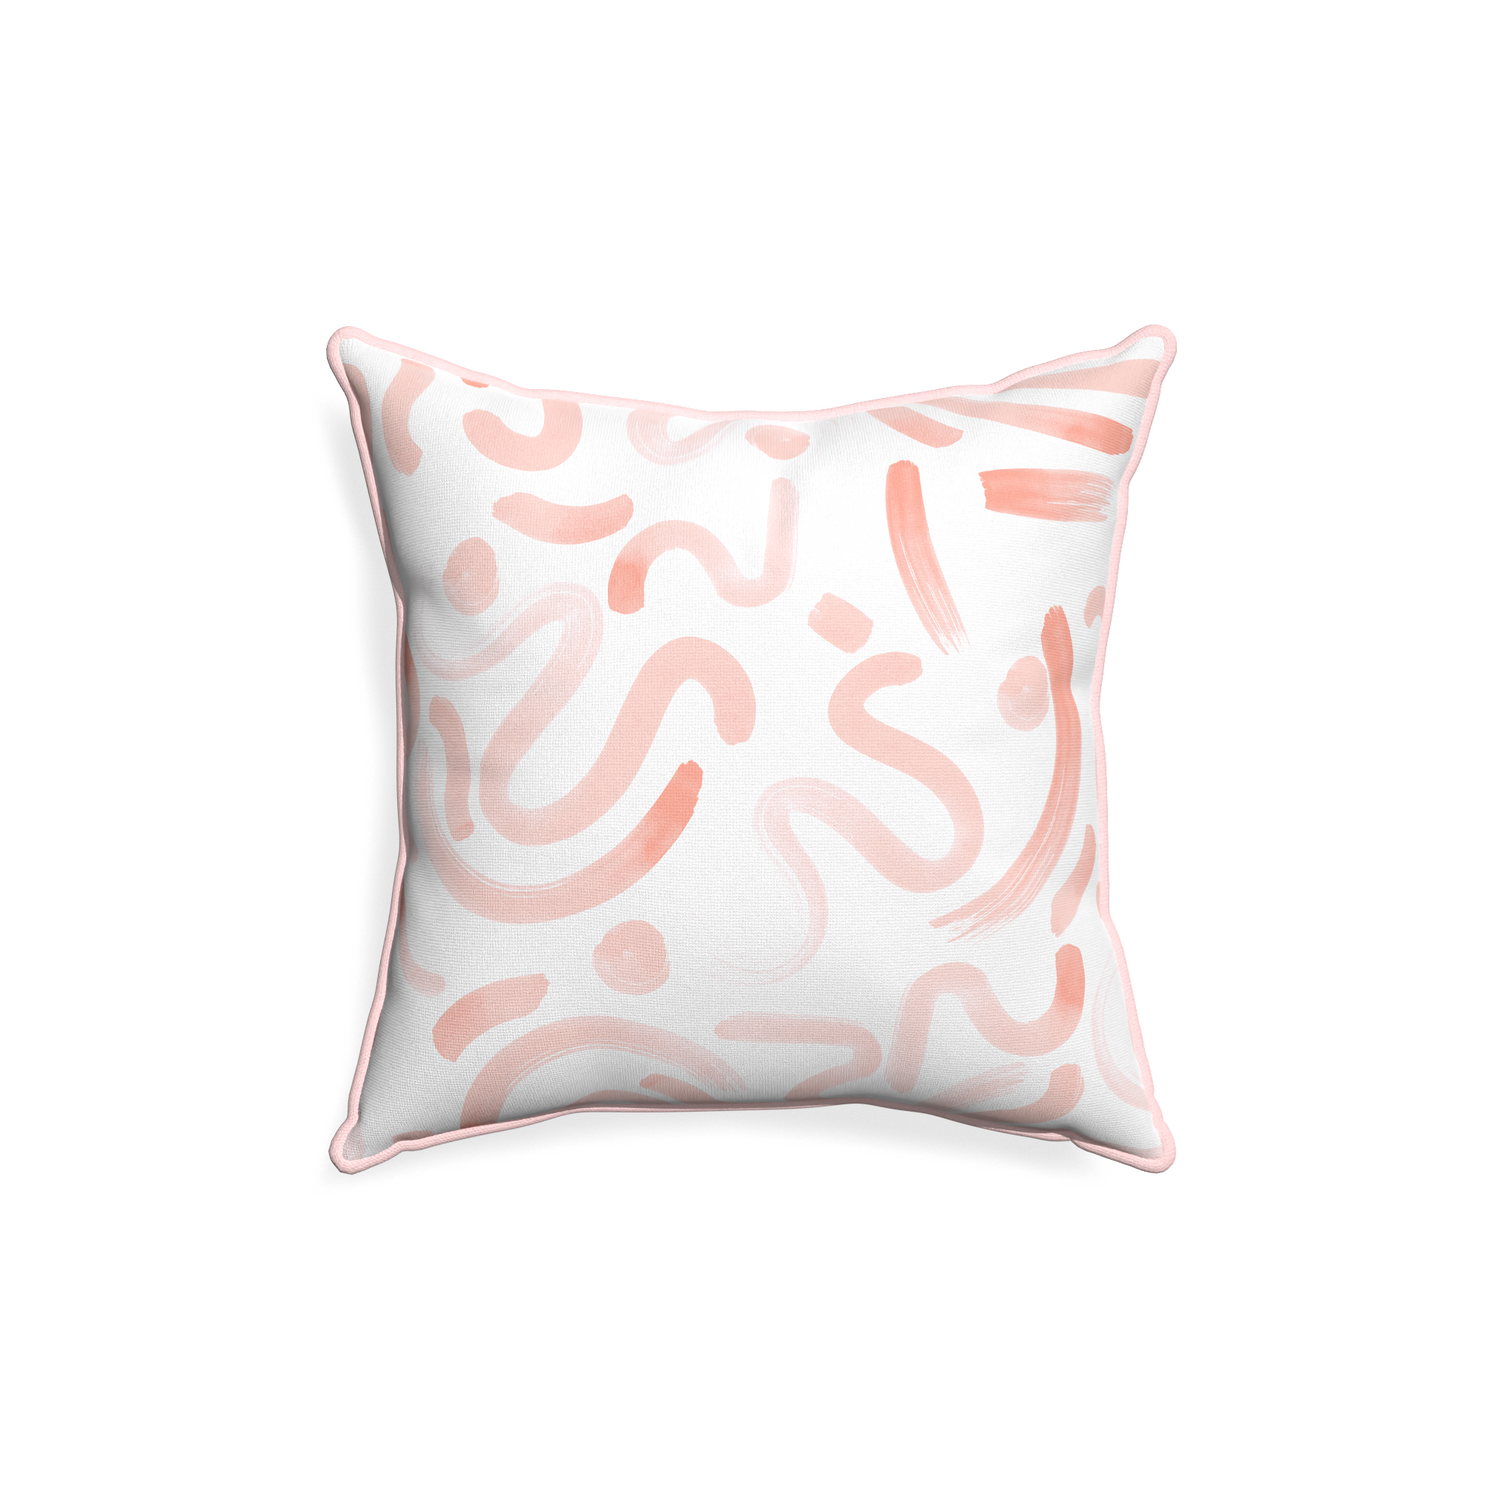 18-square hockney pink custom pillow with petal piping on white background